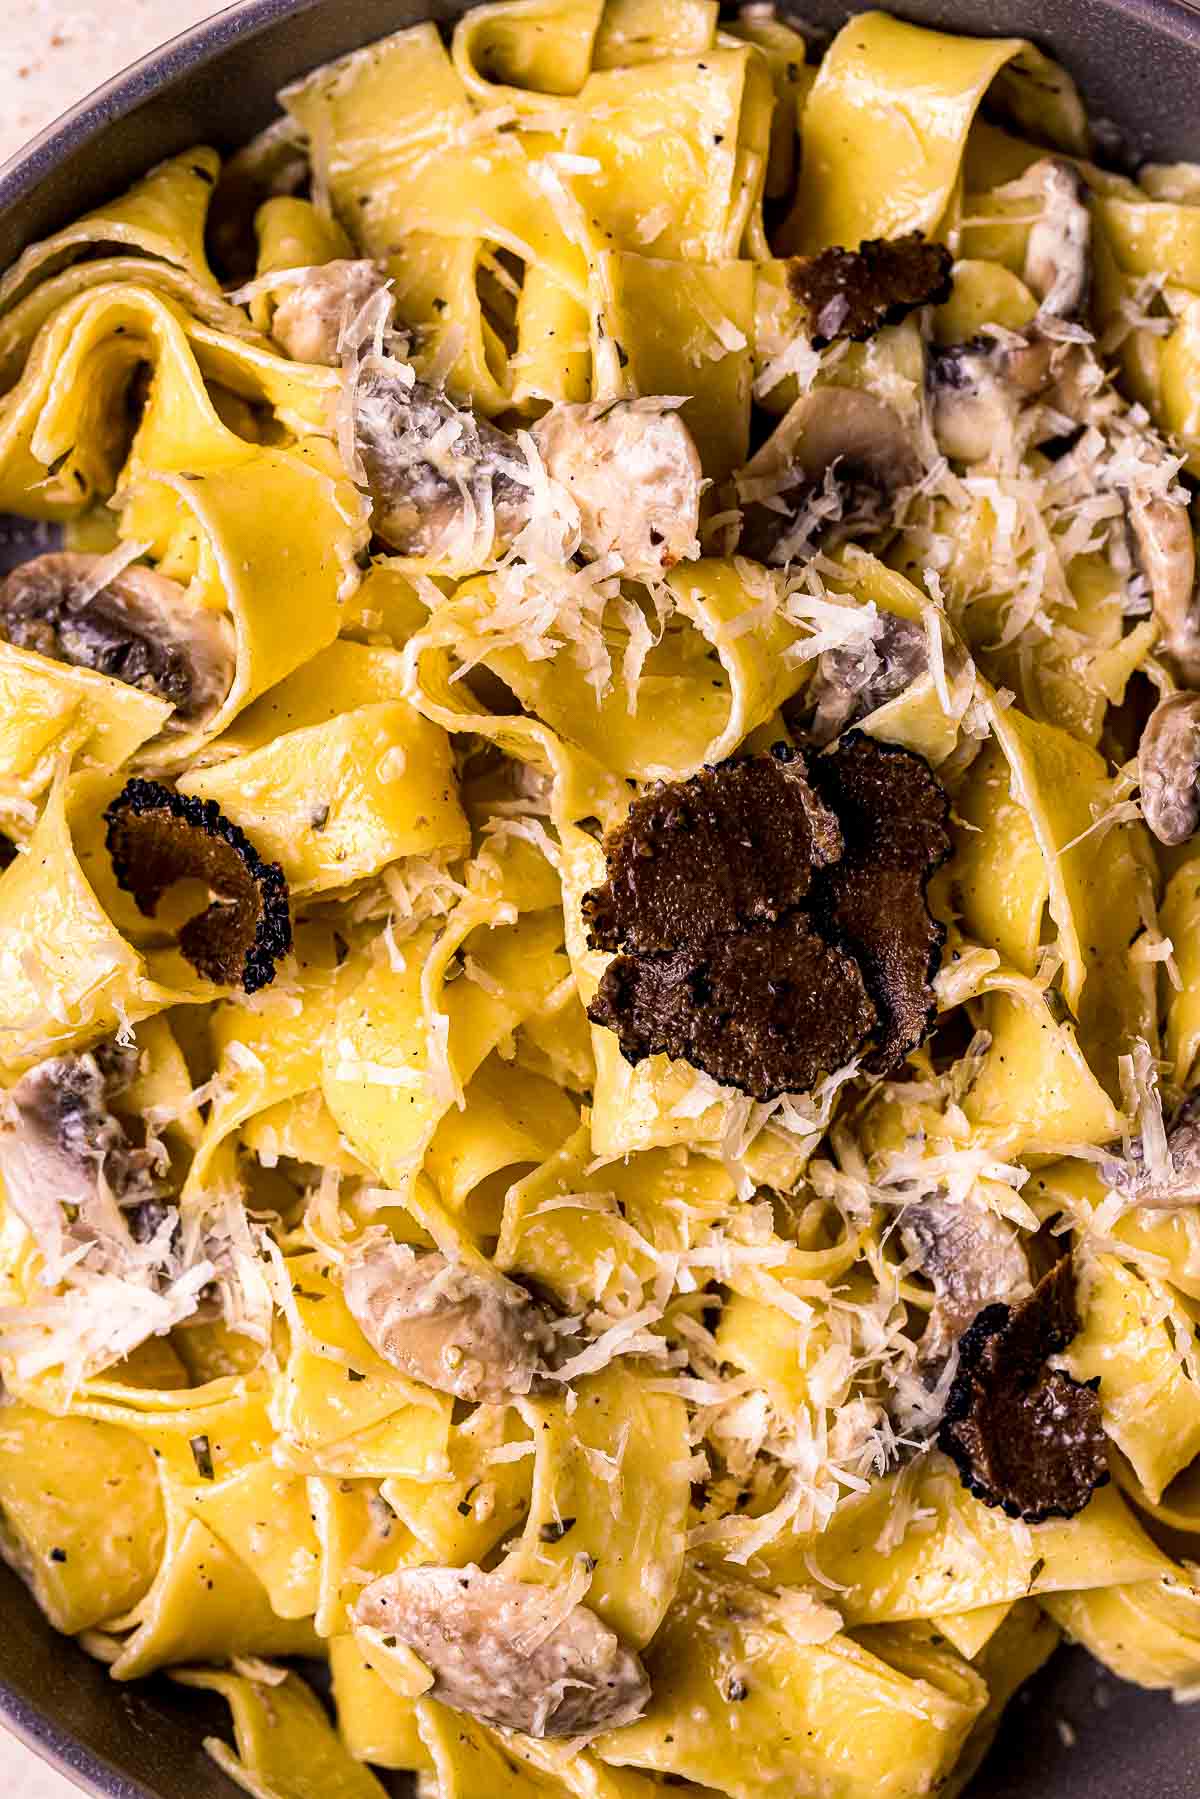 black truffle slices on creamy pasta with grated cheese